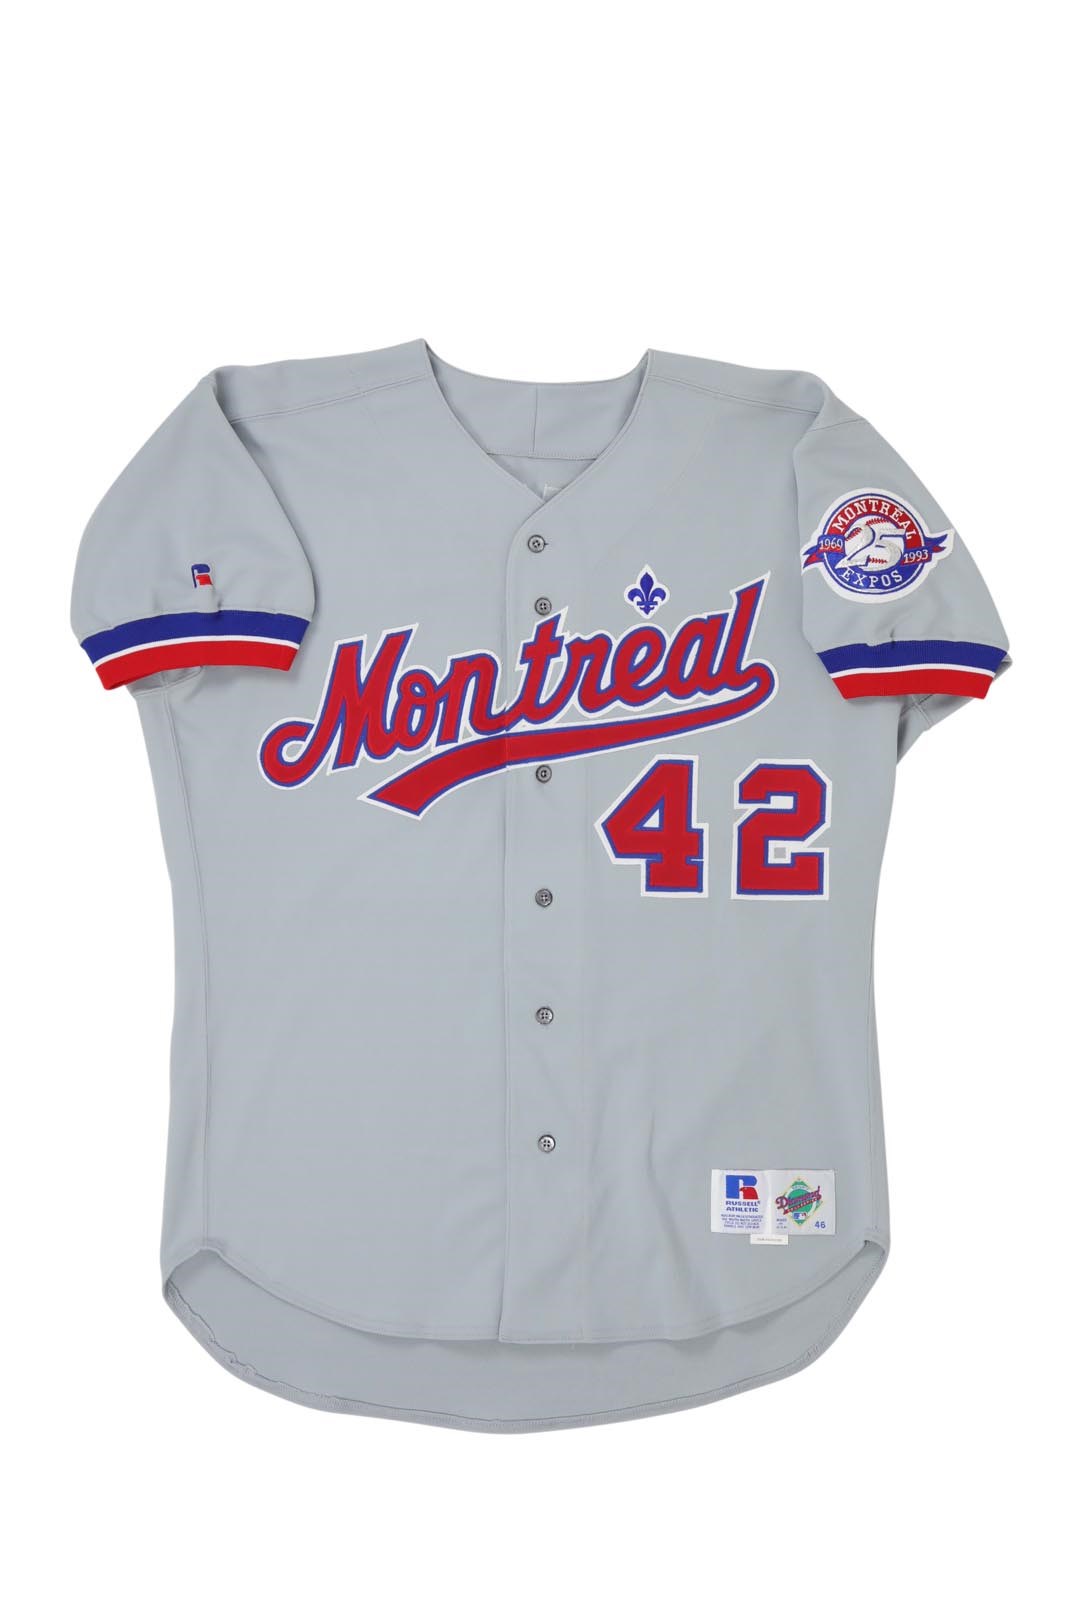 1993 Kirk Rueter Montreal Expos #42 Game Worn Jersey - Jackie Robinson Retired Number